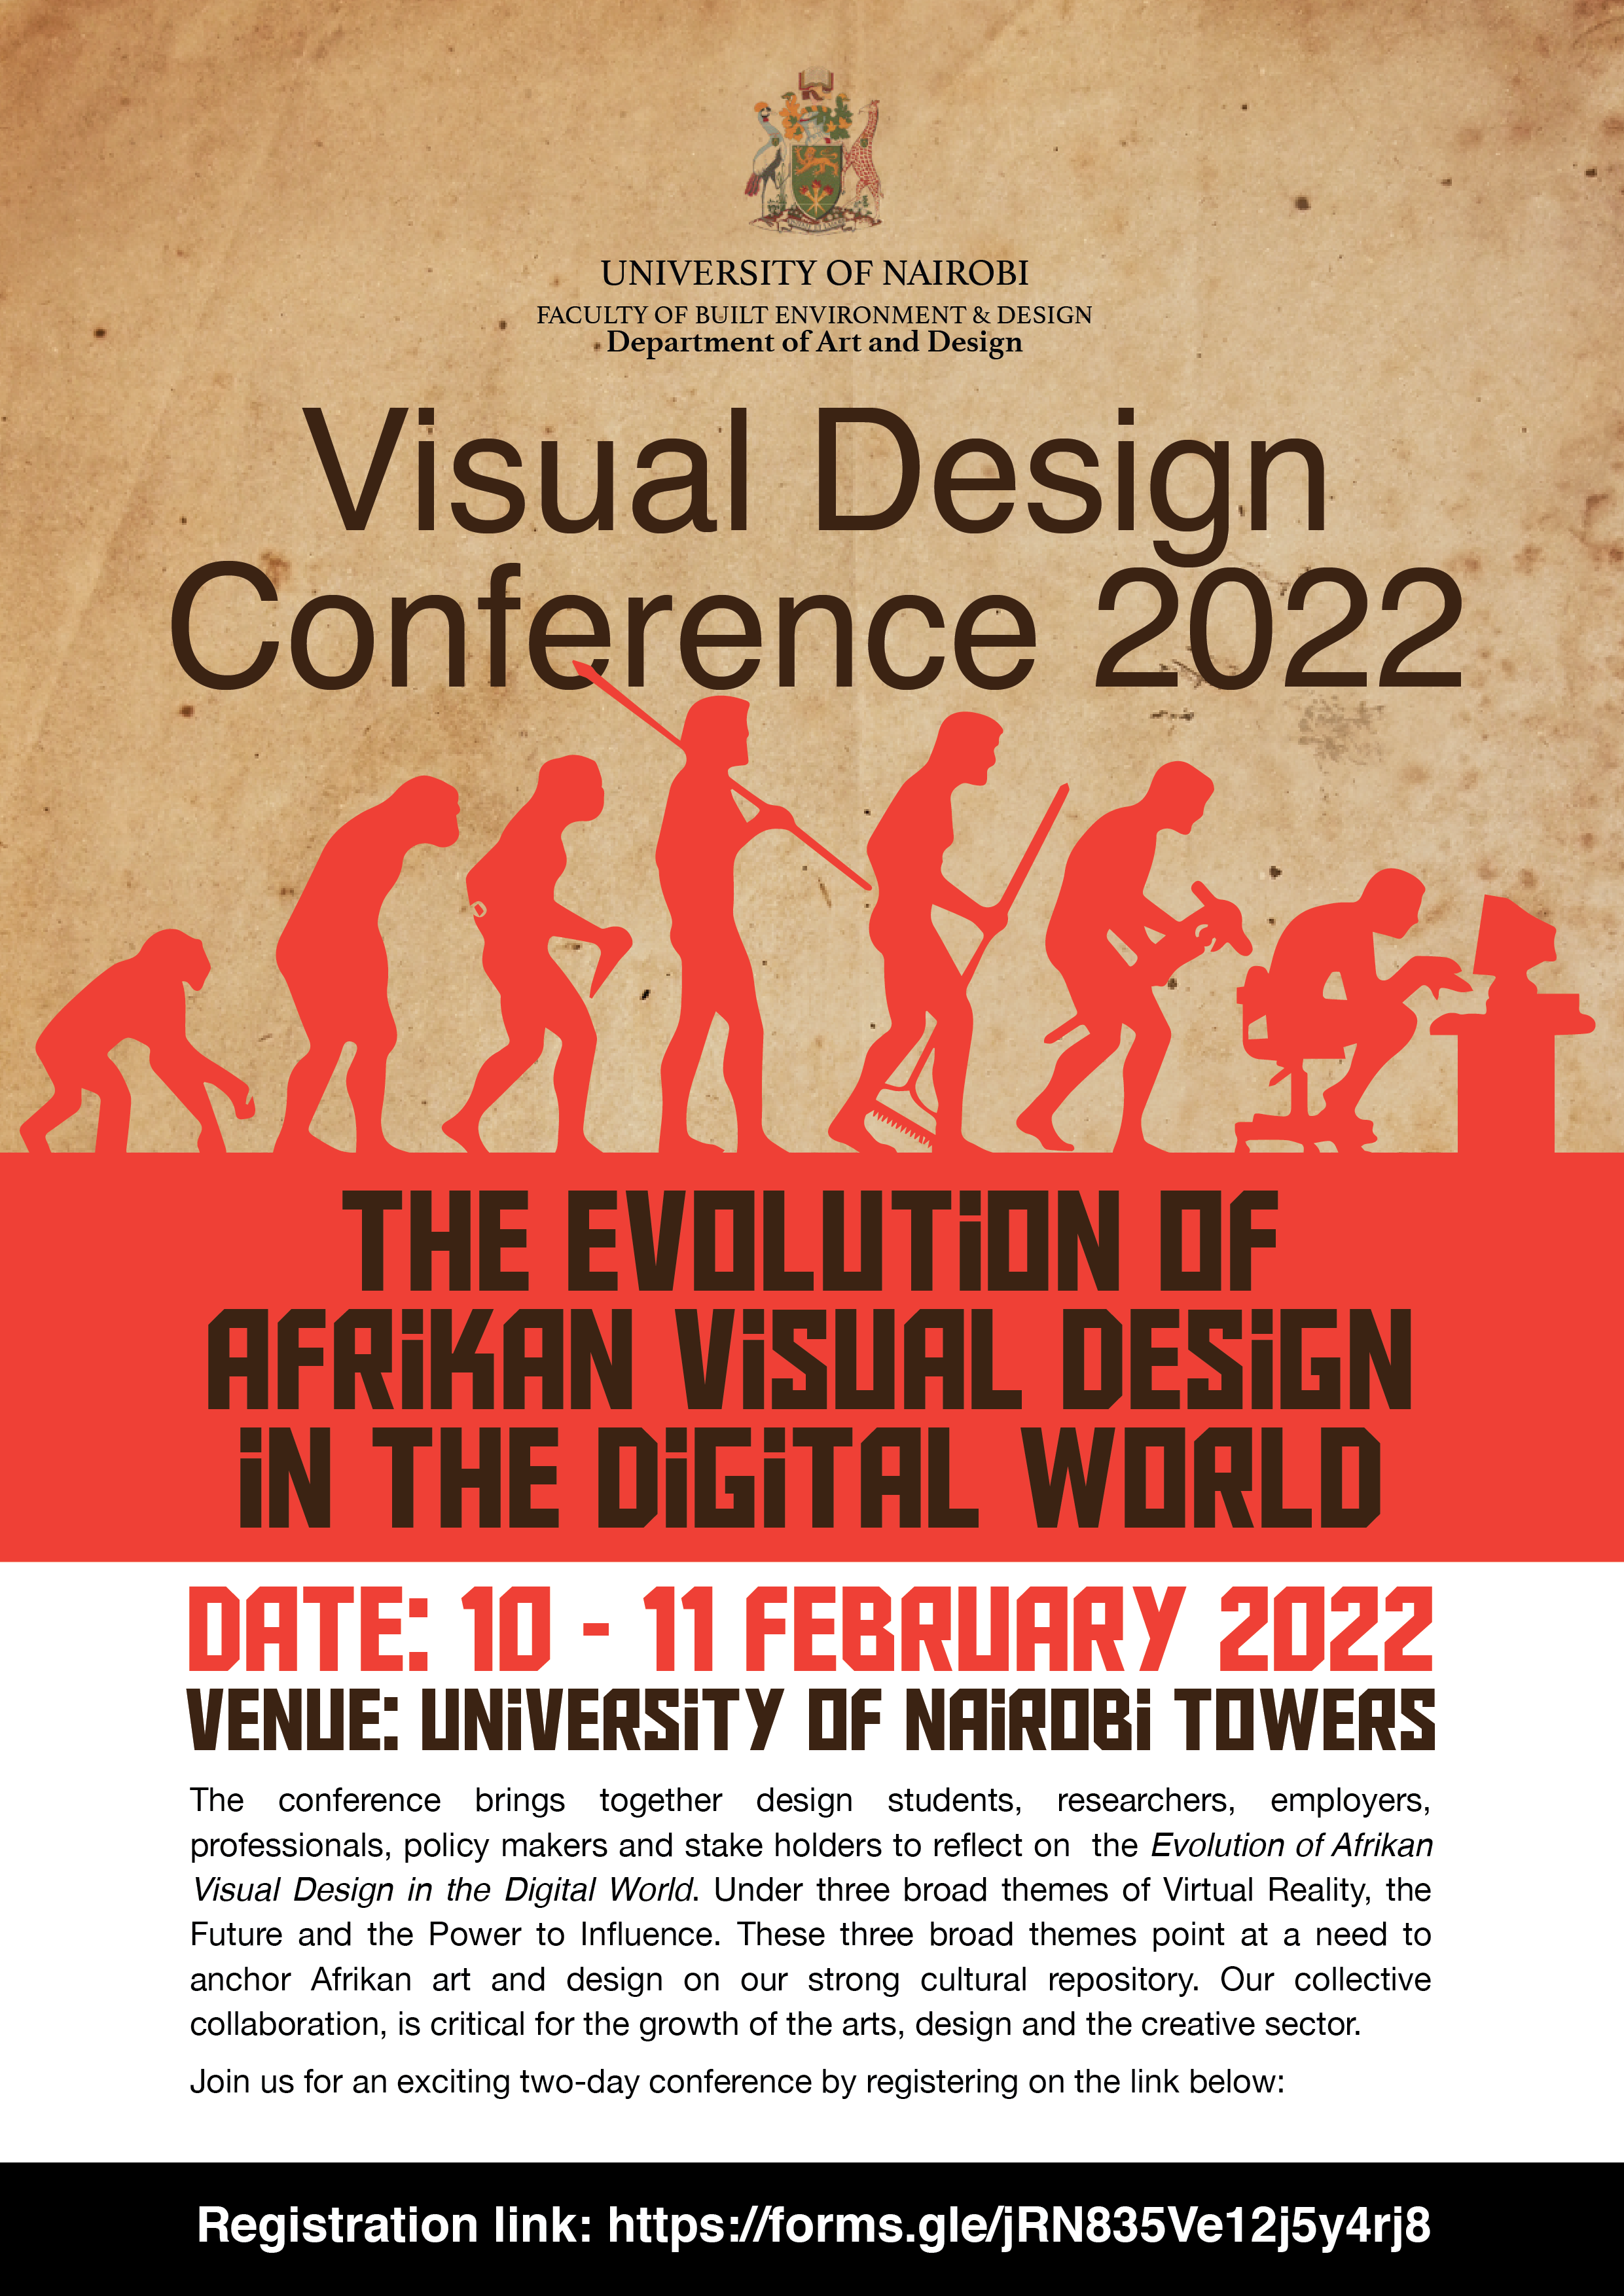 Visual Design Conference 2022 FACULTY OF THE BUILT ENVIRONMENT AND DESIGN